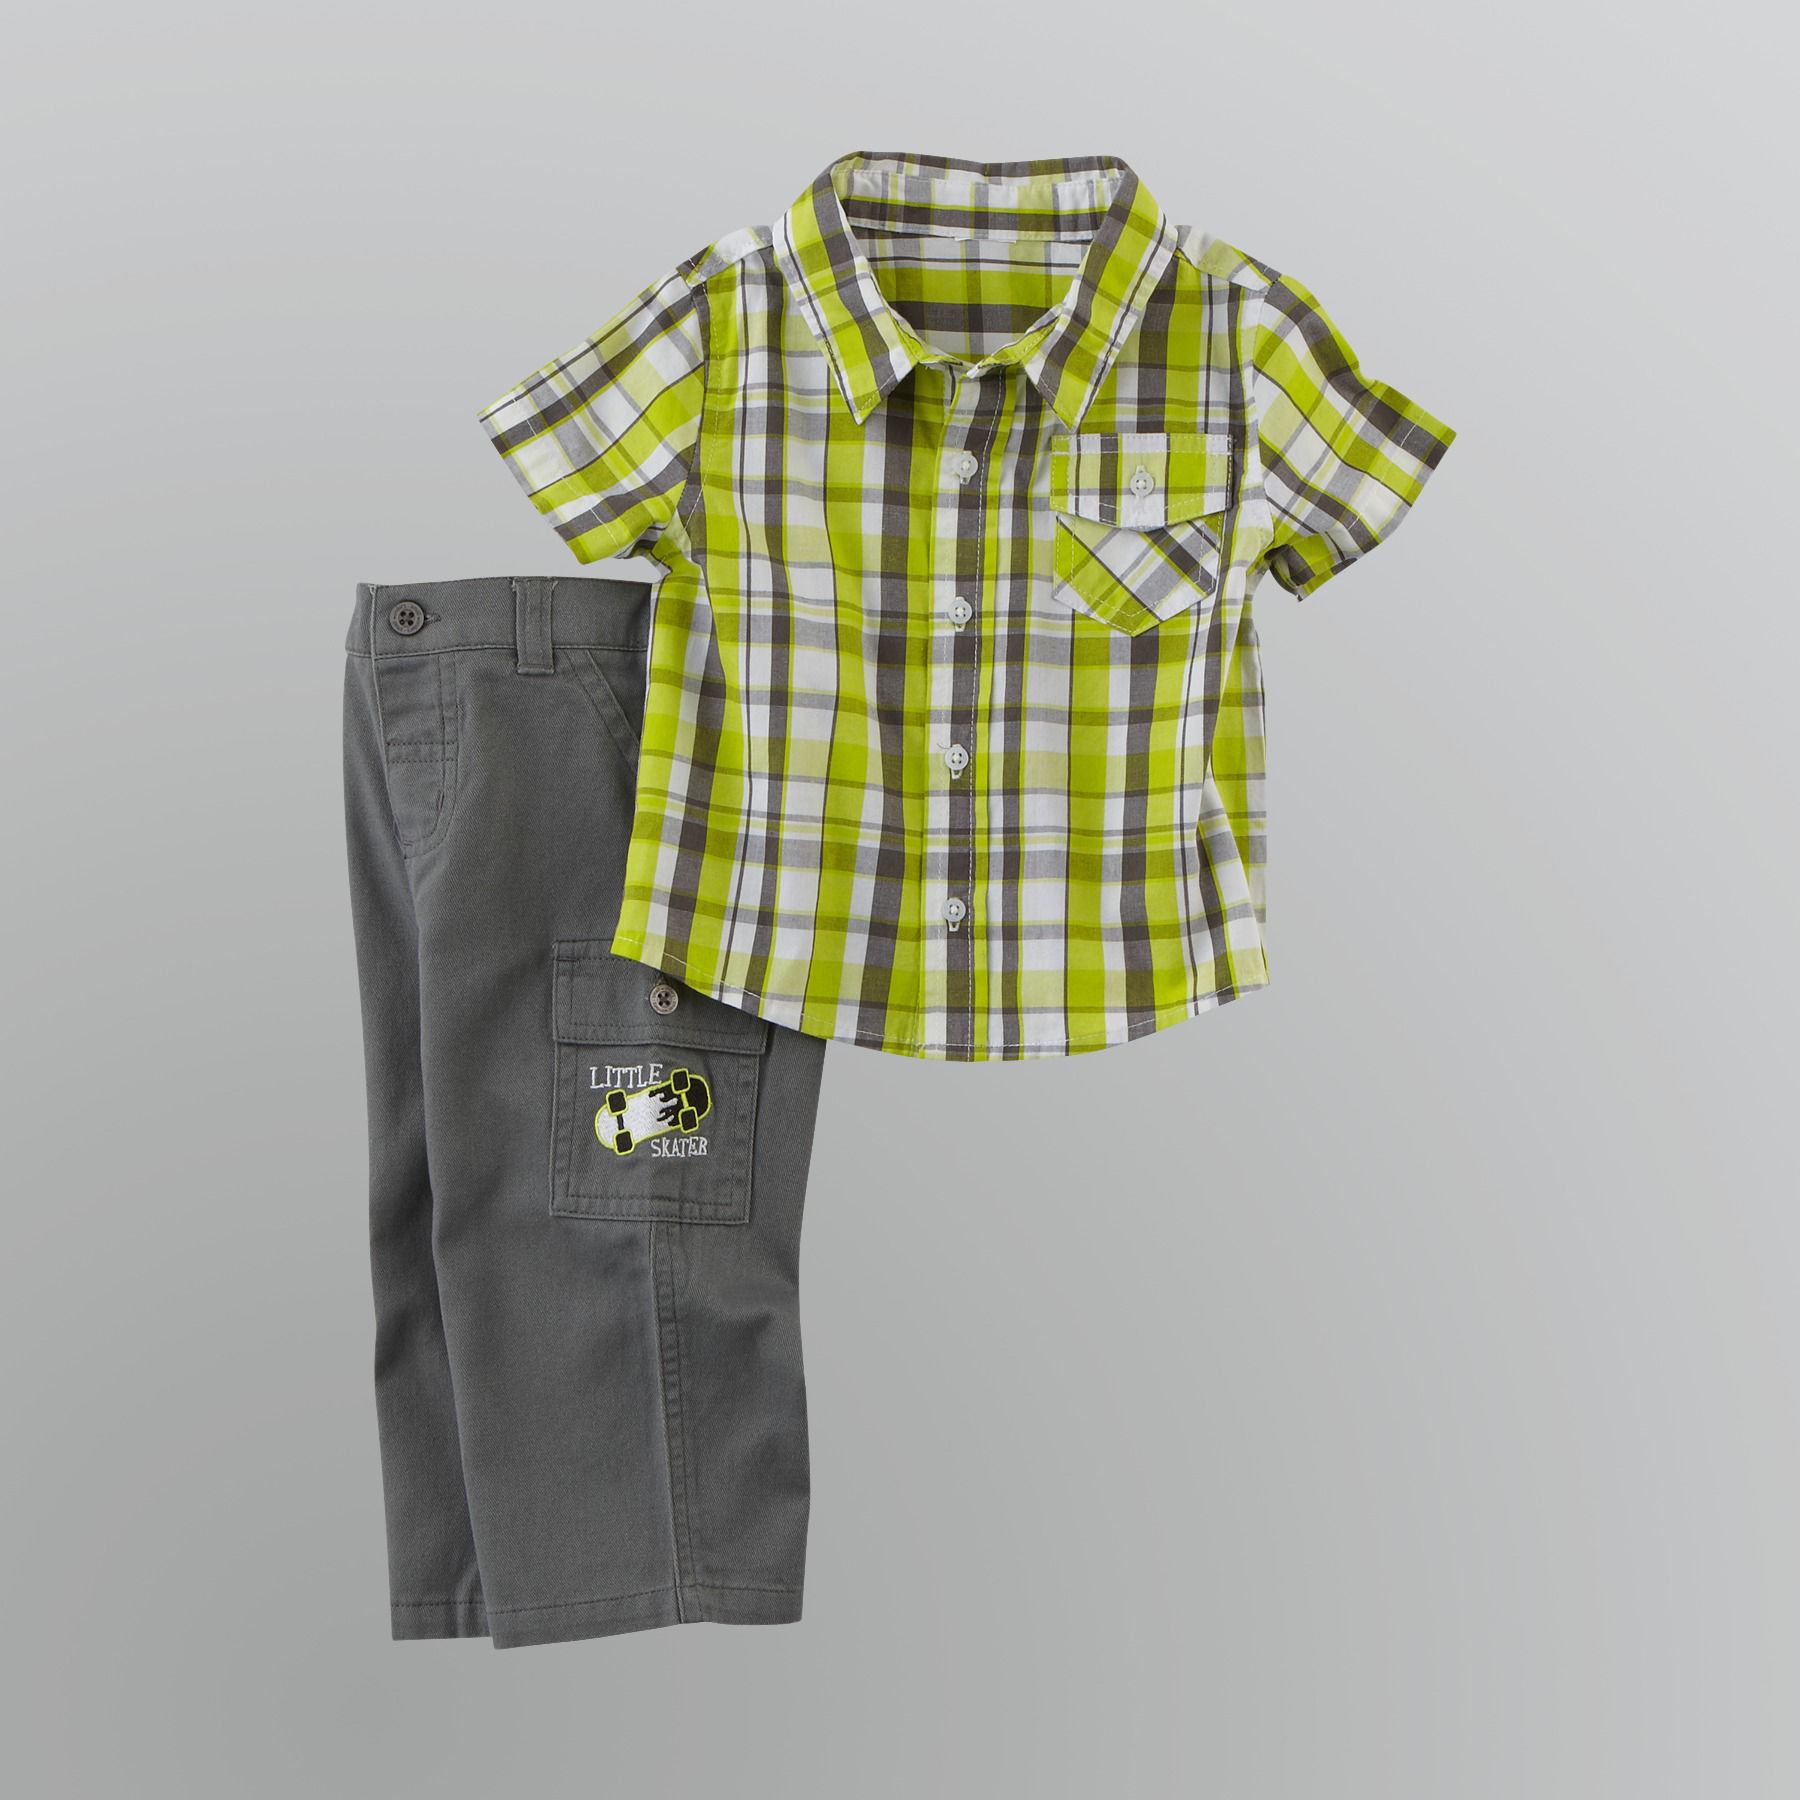 Small Wonders Toddler Boy's Plaid Shirt and Cargo Pants